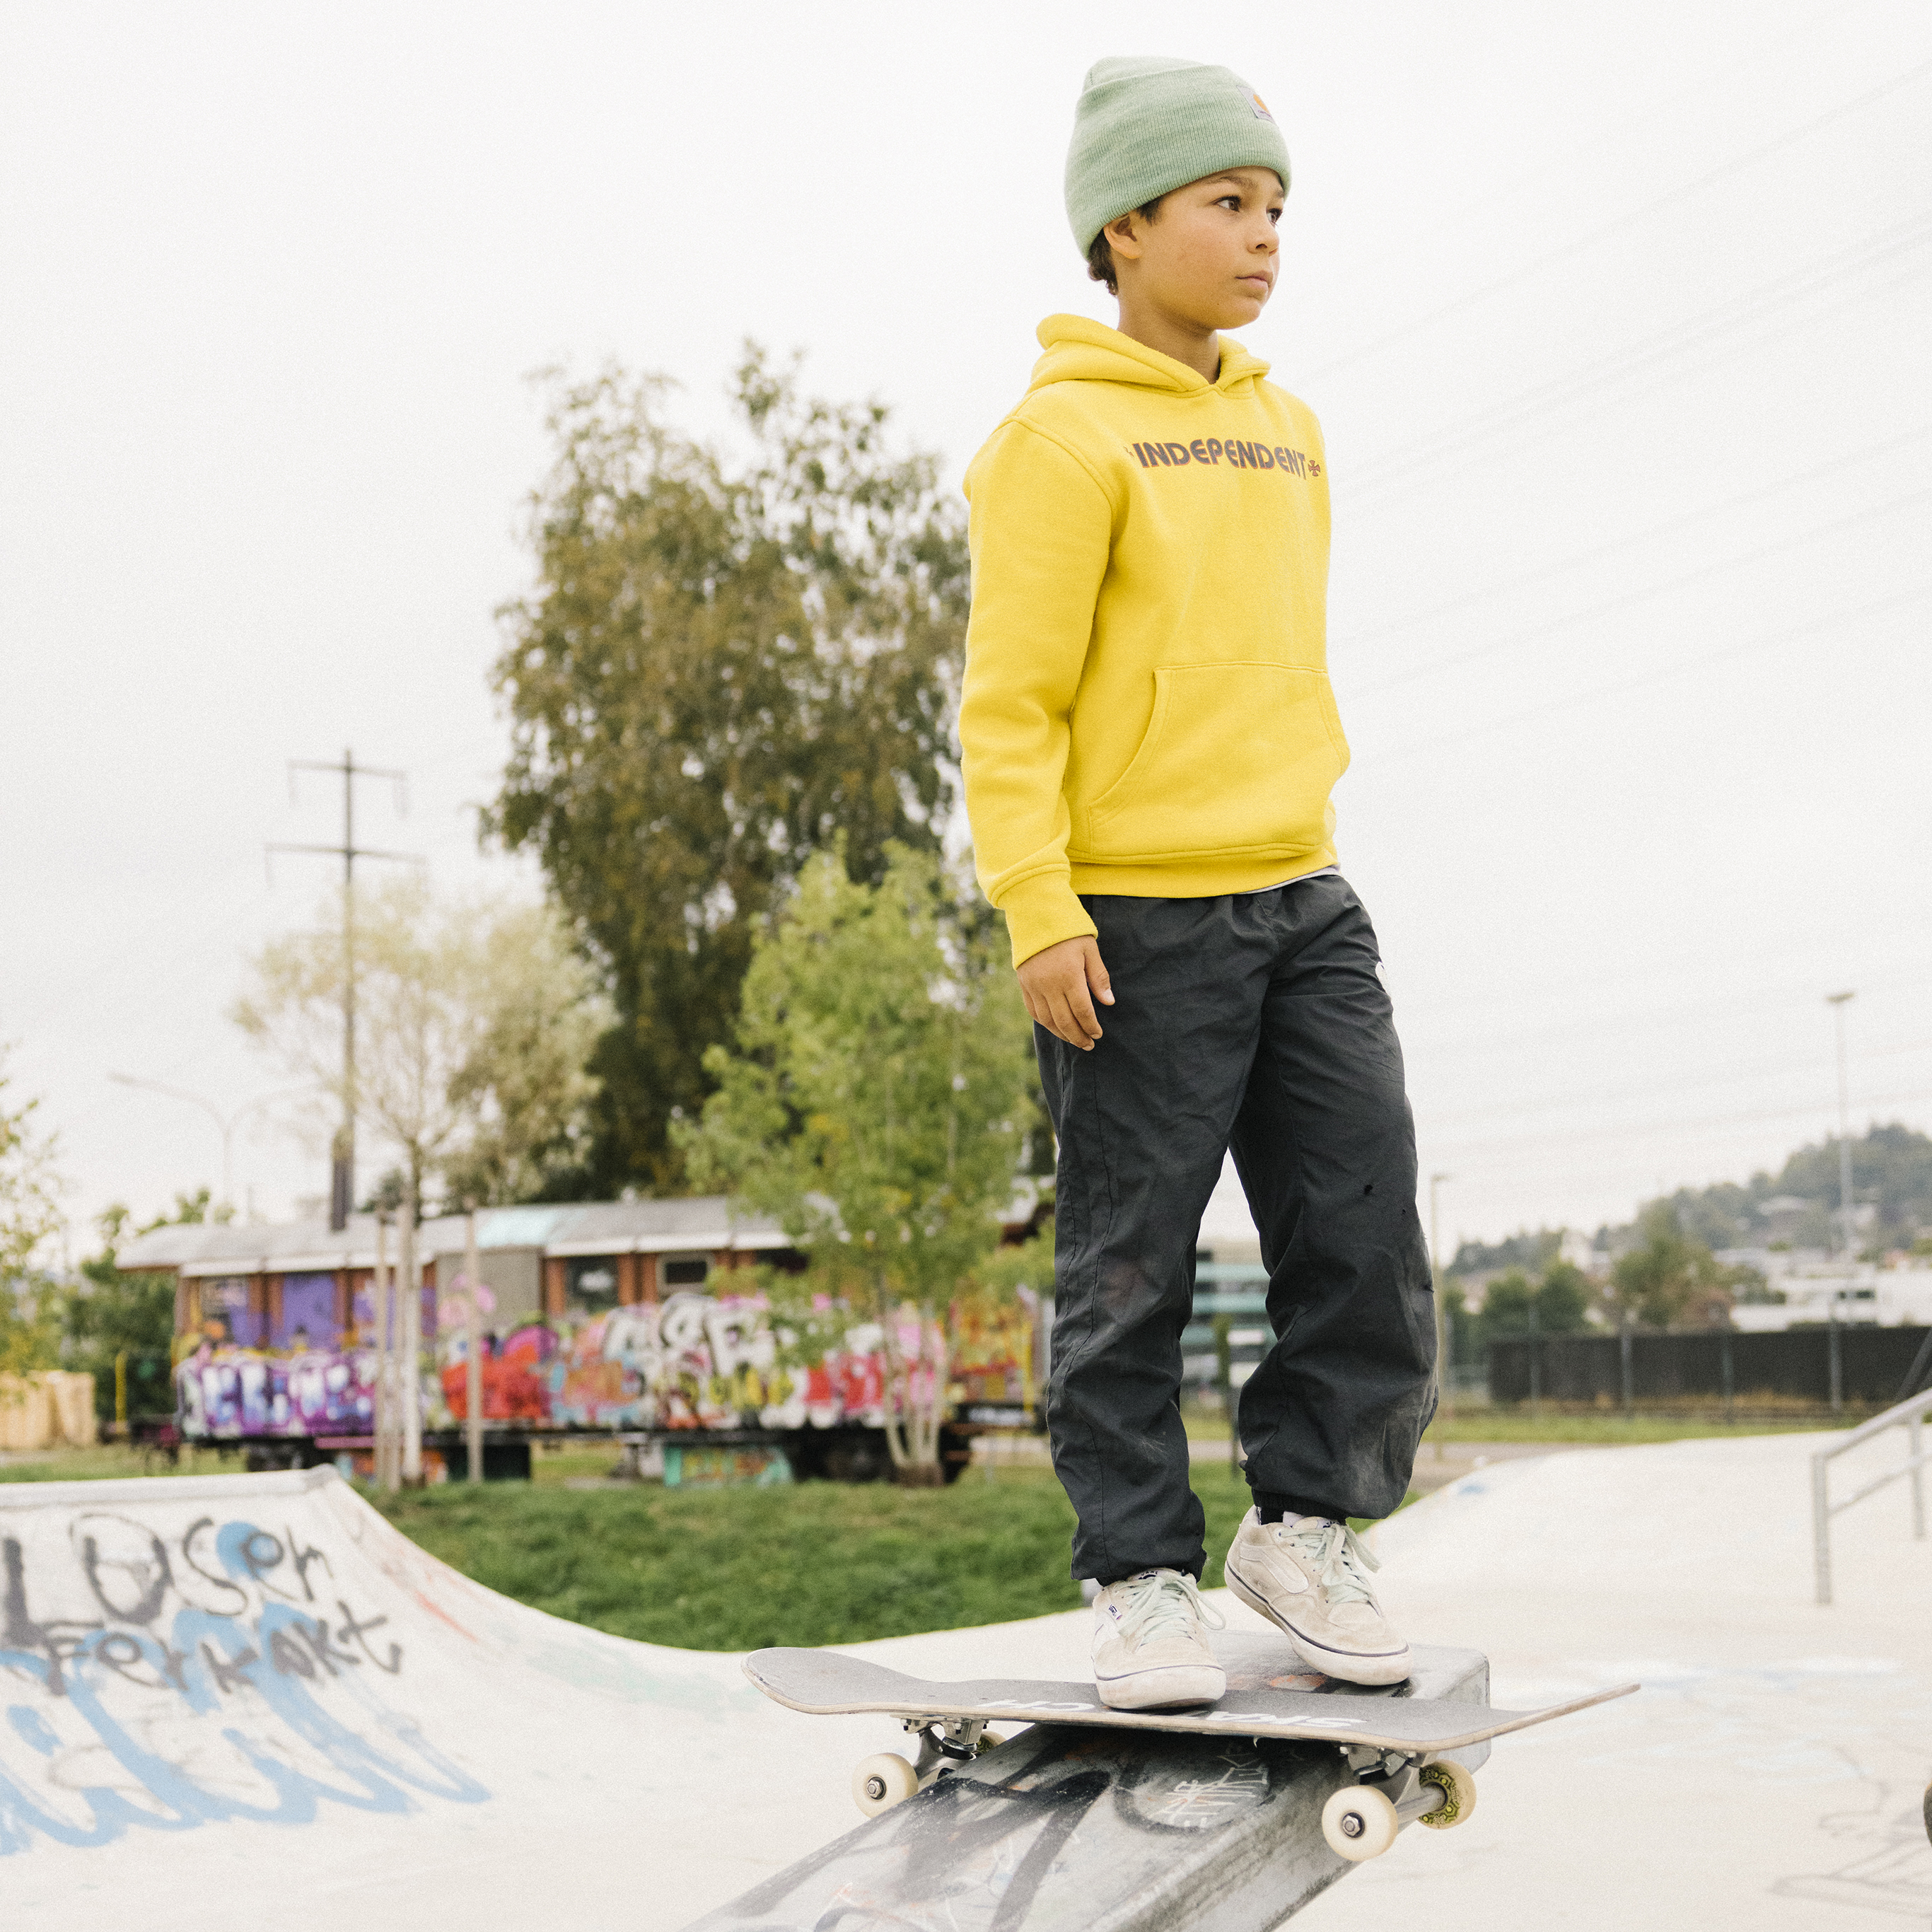 A youth stands on a grind pole with his skateboard and looks confidently into the distance.